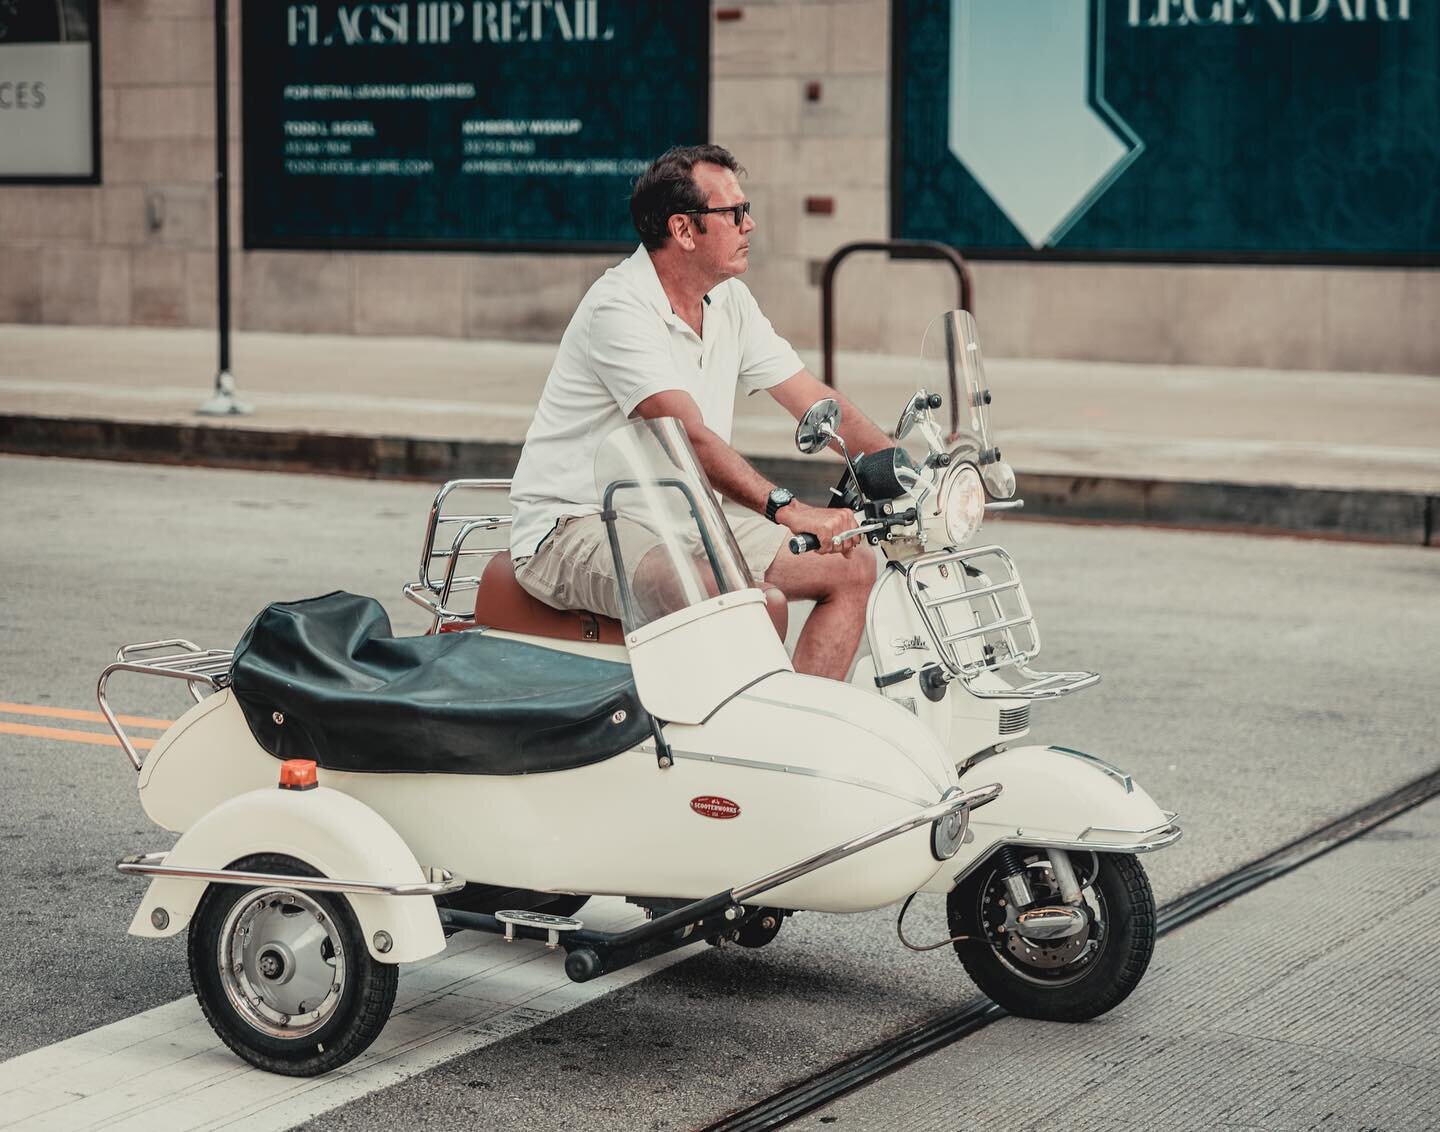 The Road Warrior

Chicago ~ July, 2021

#streetphotographersfdn #streetphotographersmagazine #chicago #chicagostreetphotography #streetphotographerscommunity #ourstreets #scooter #vespa #nwiphotographer